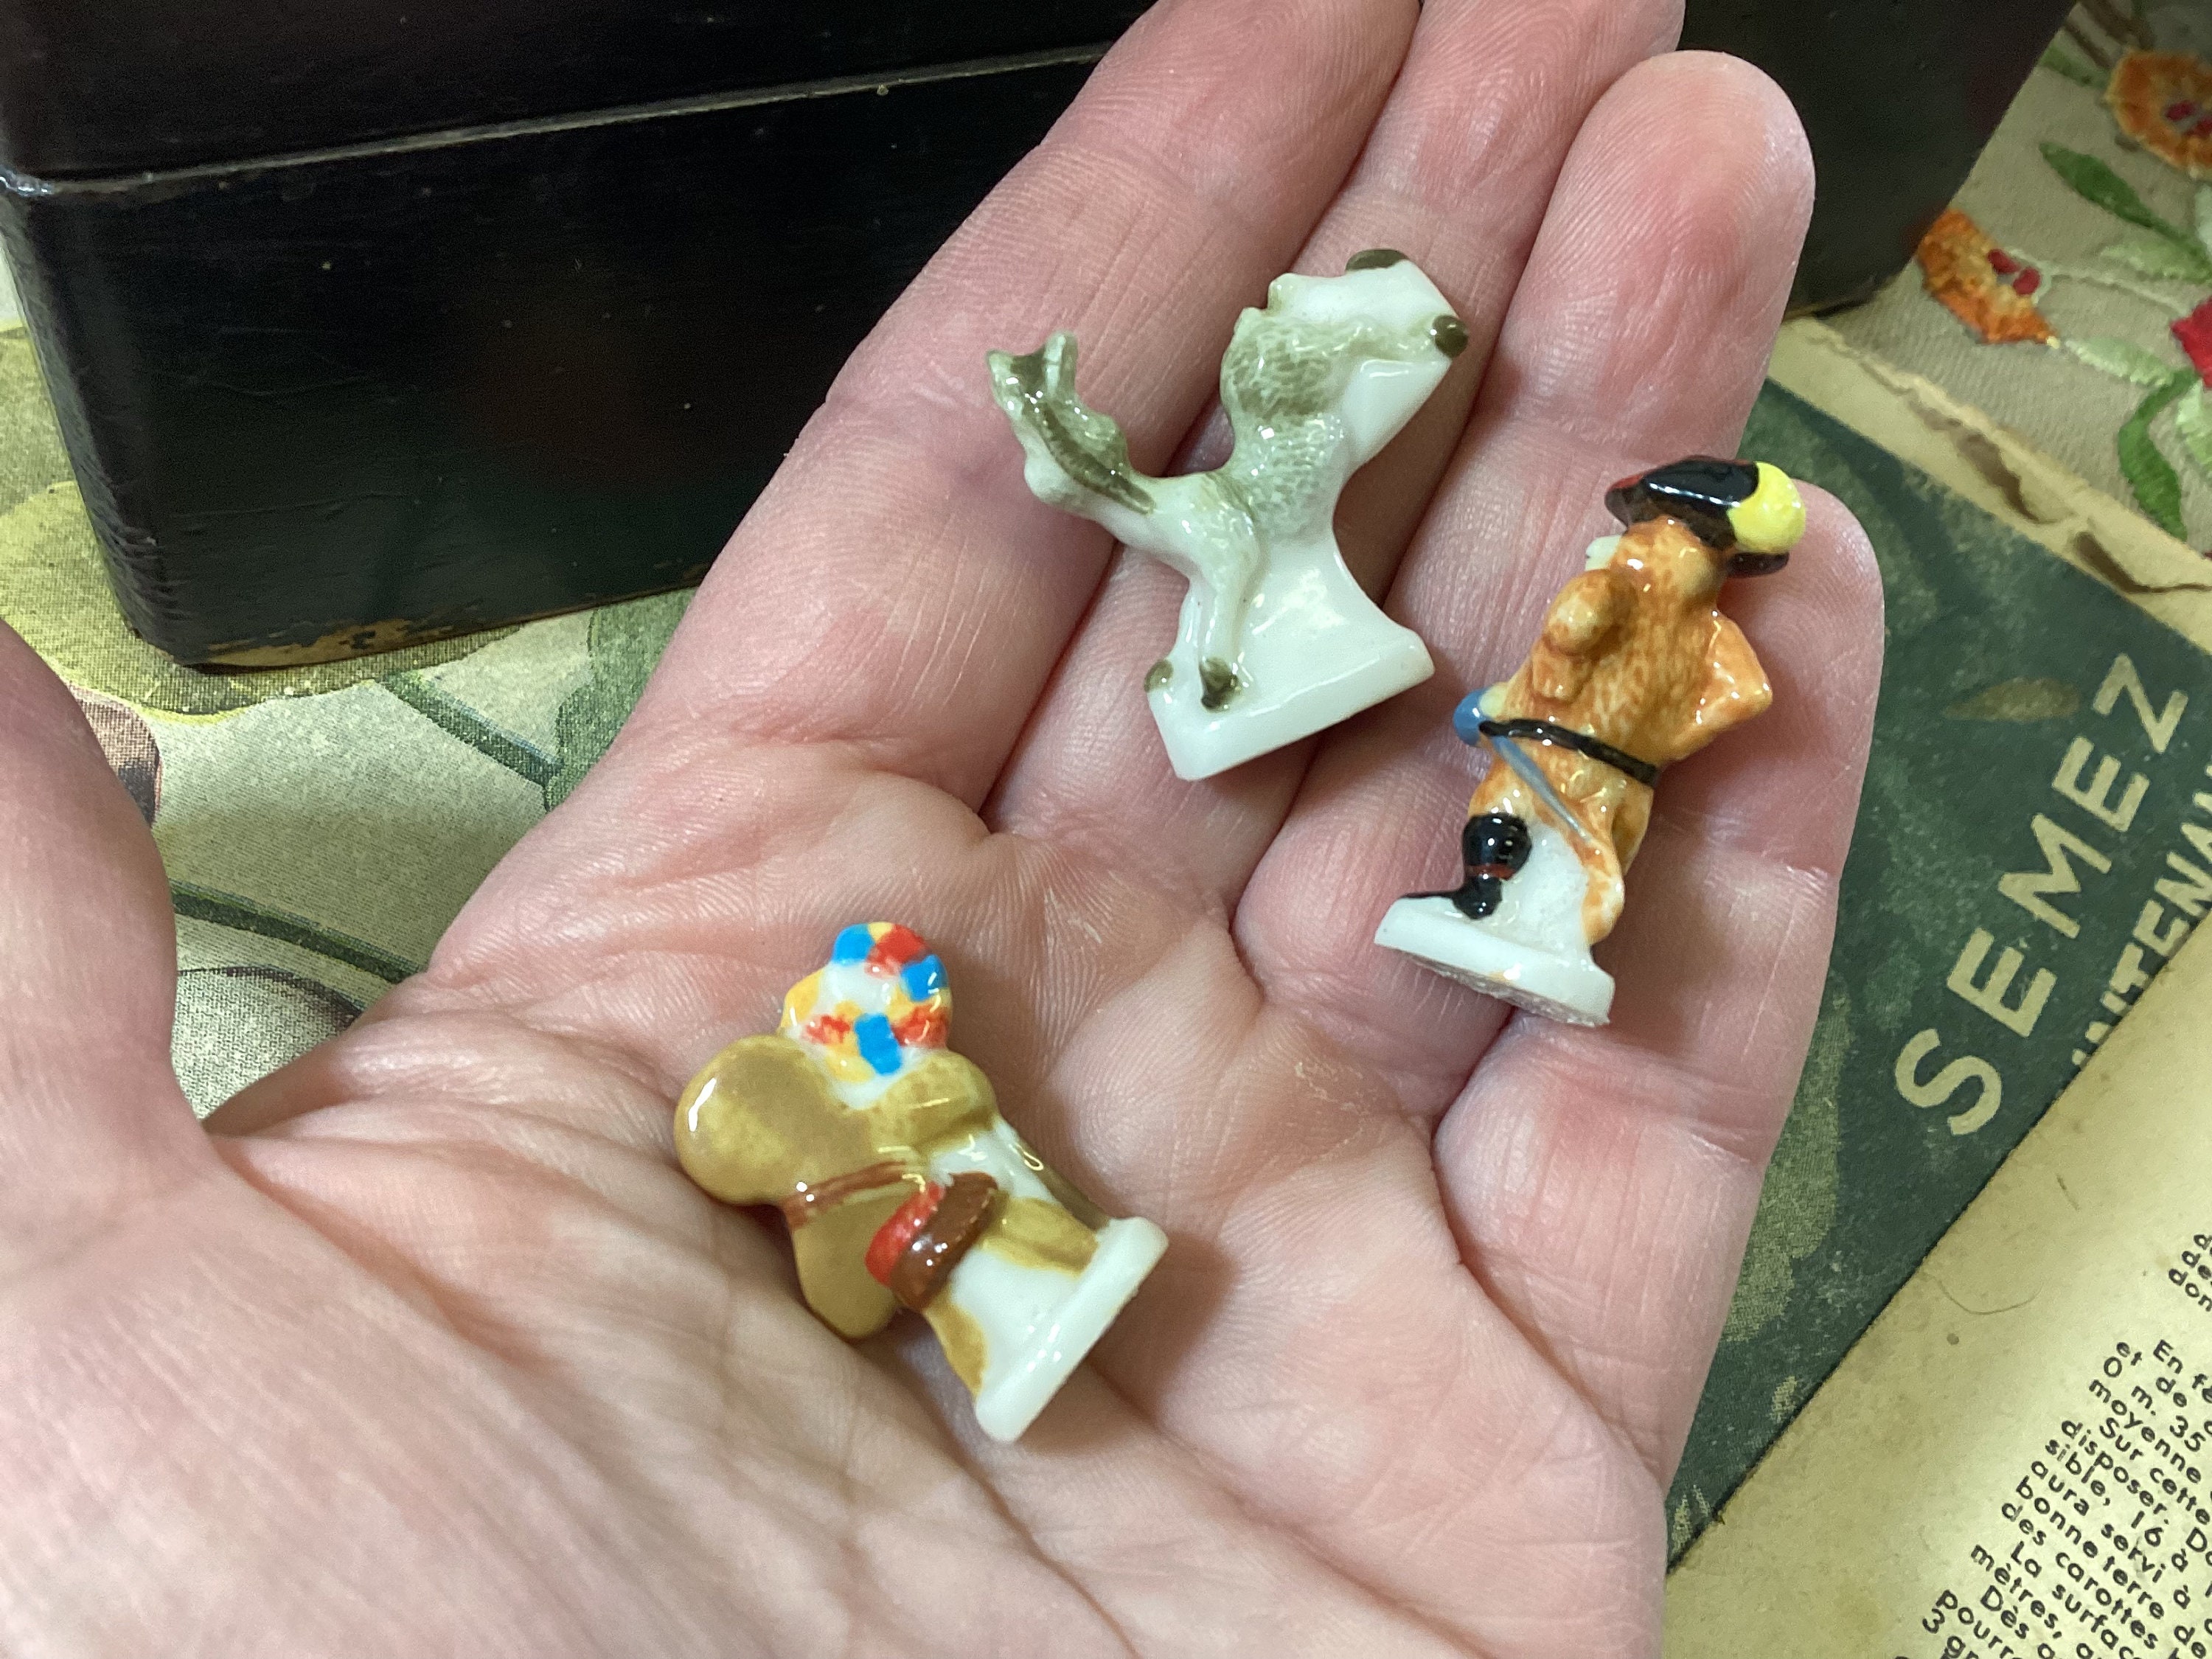 Lot 4 French Feves / Miniatures porcelain (1.5 tall): SHREK - collectibles  - by owner - sale - craigslist